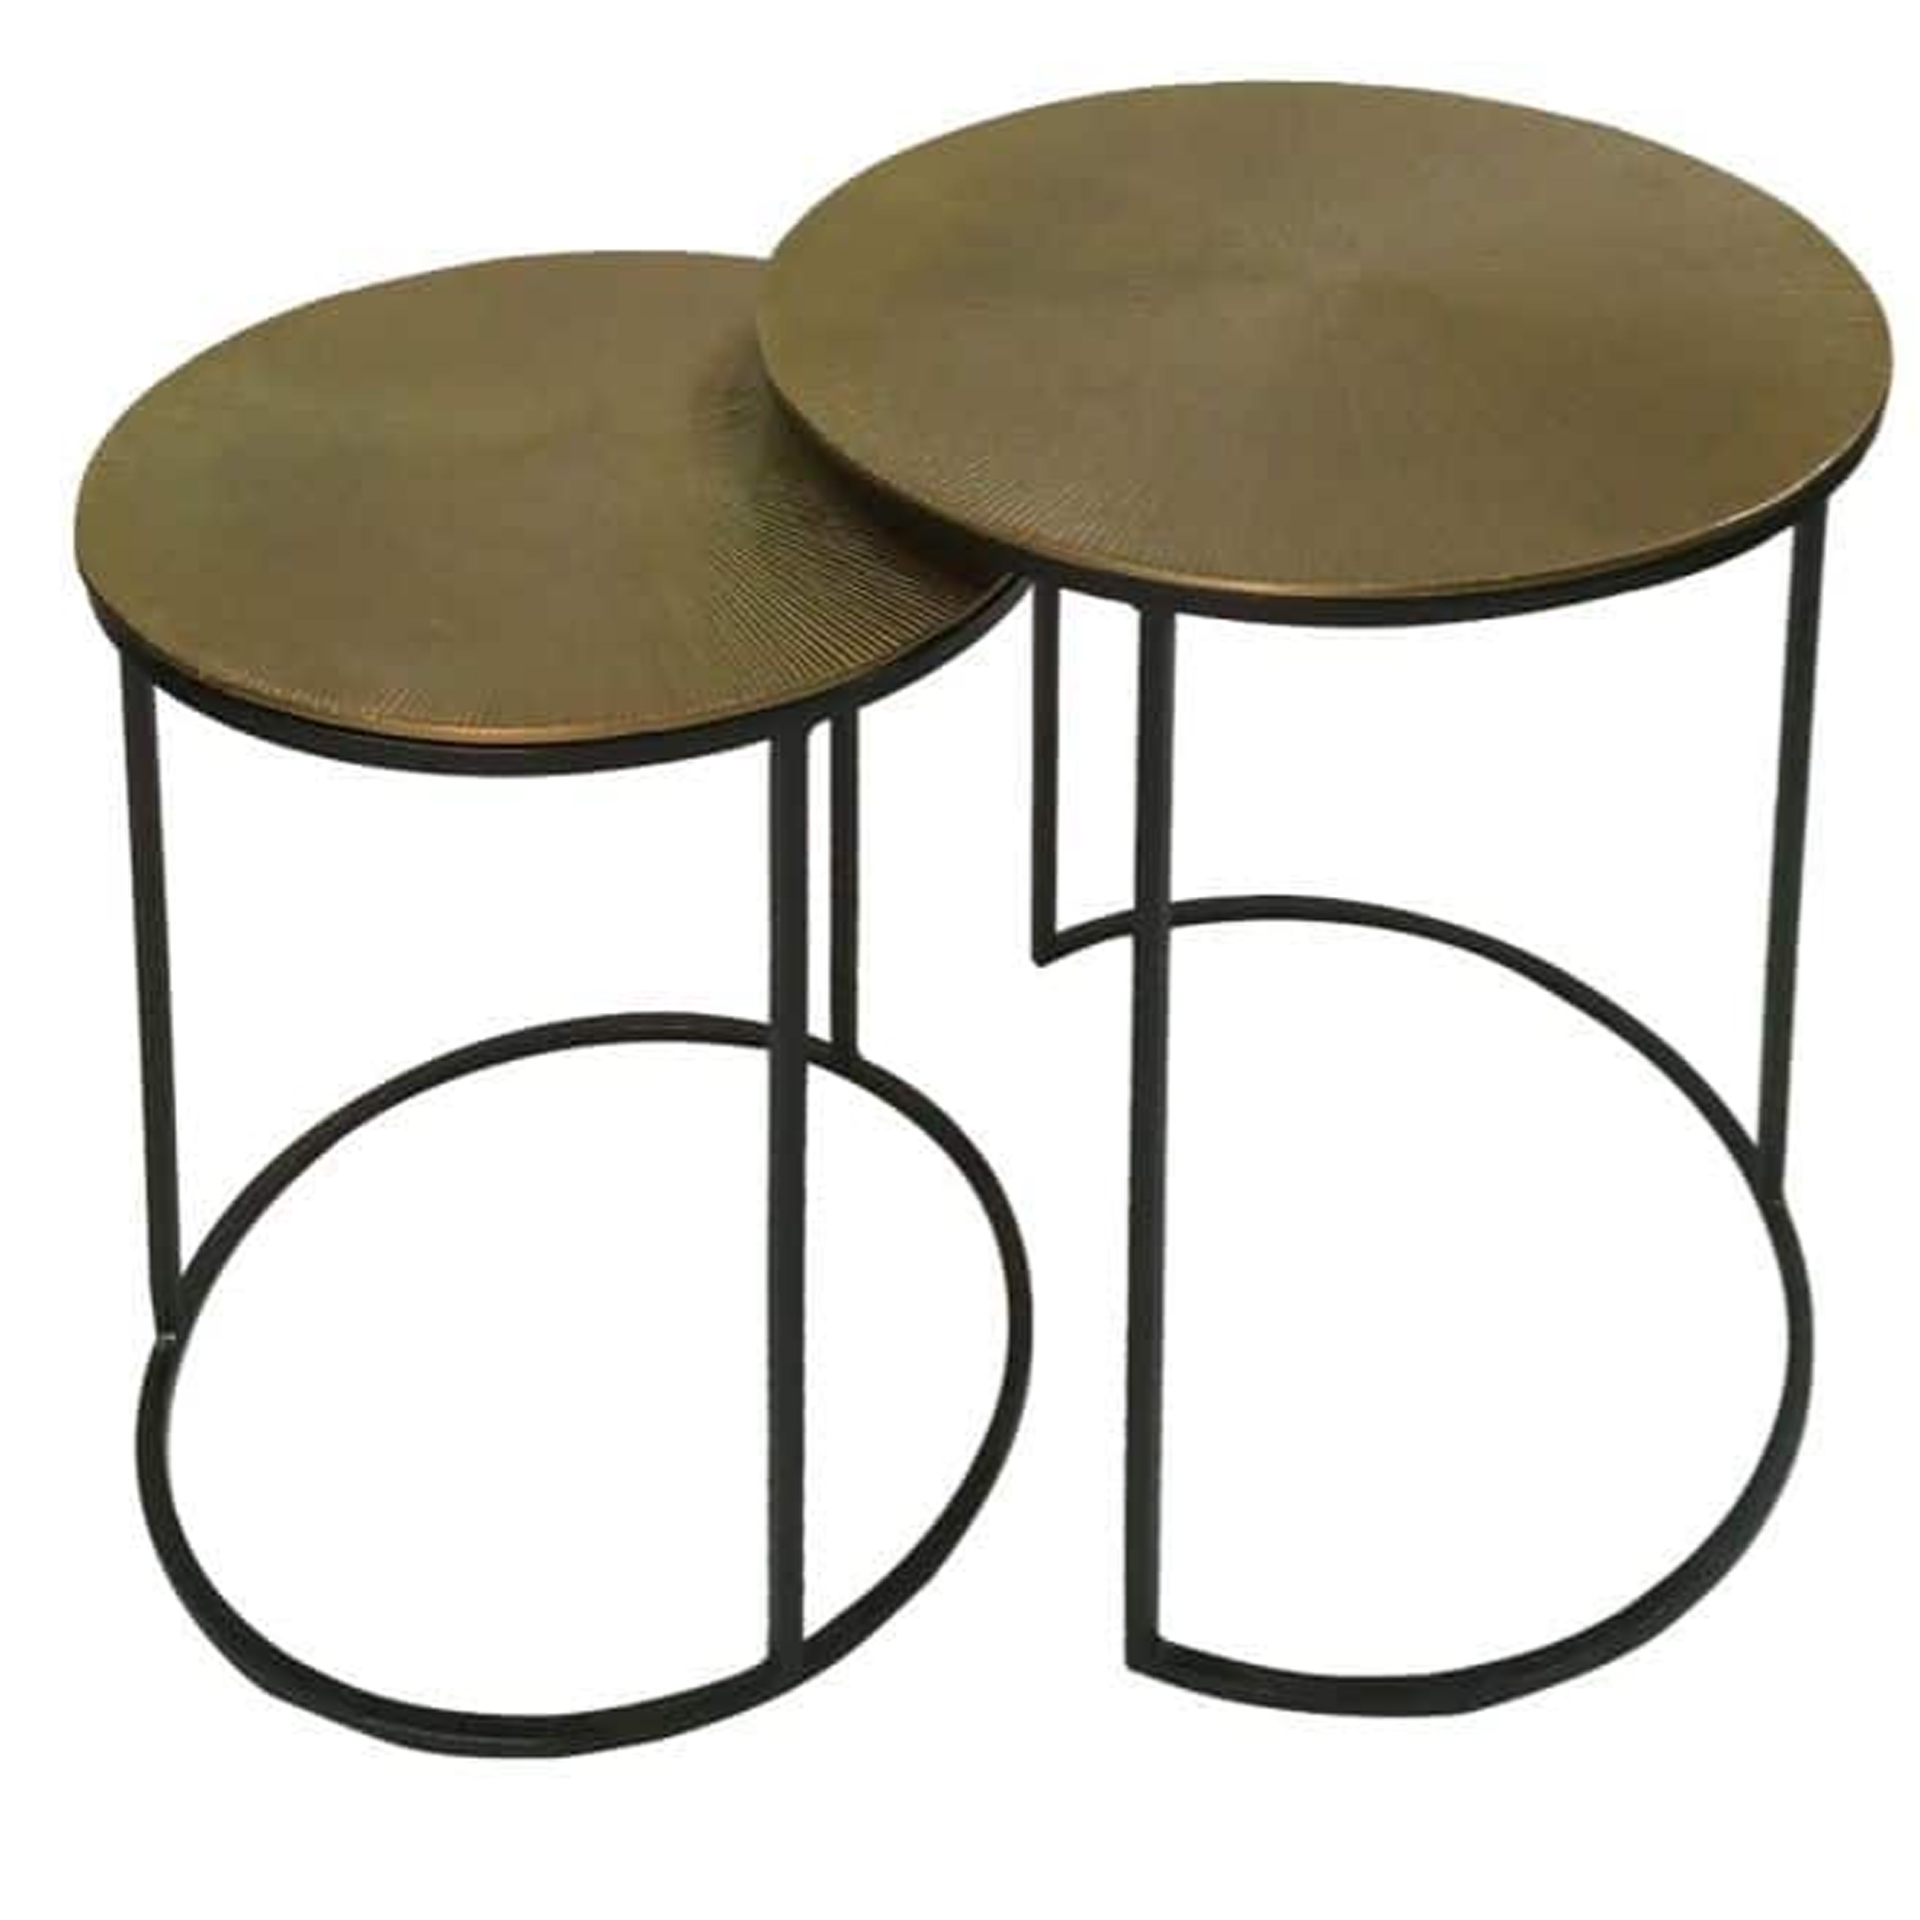 Suhani Set of 2 Black and Gold Nesting Tables